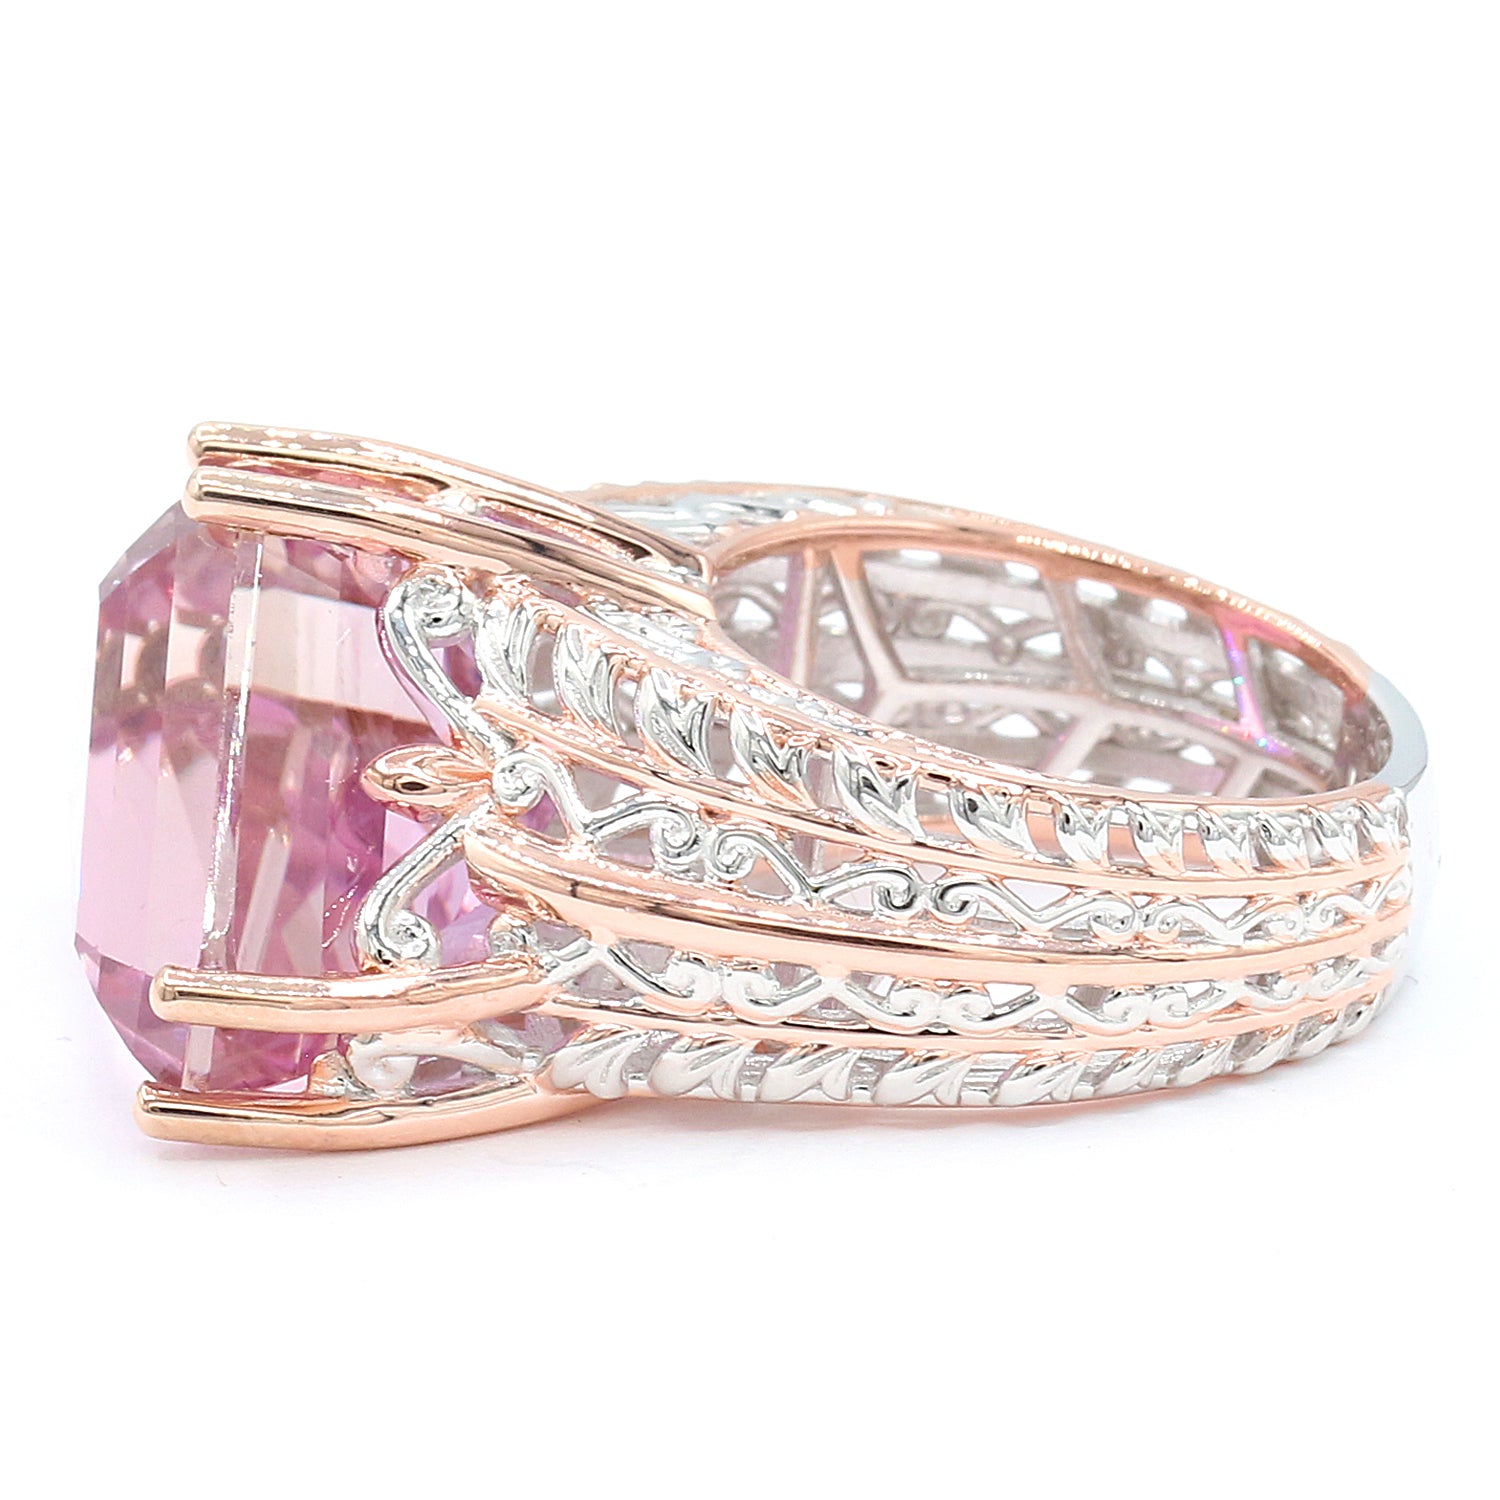 Limited Edition Gems en Vogue Luxe One-of-a-Kind 25.65ctw Shield Cut Kunzite & White Zircon Ring